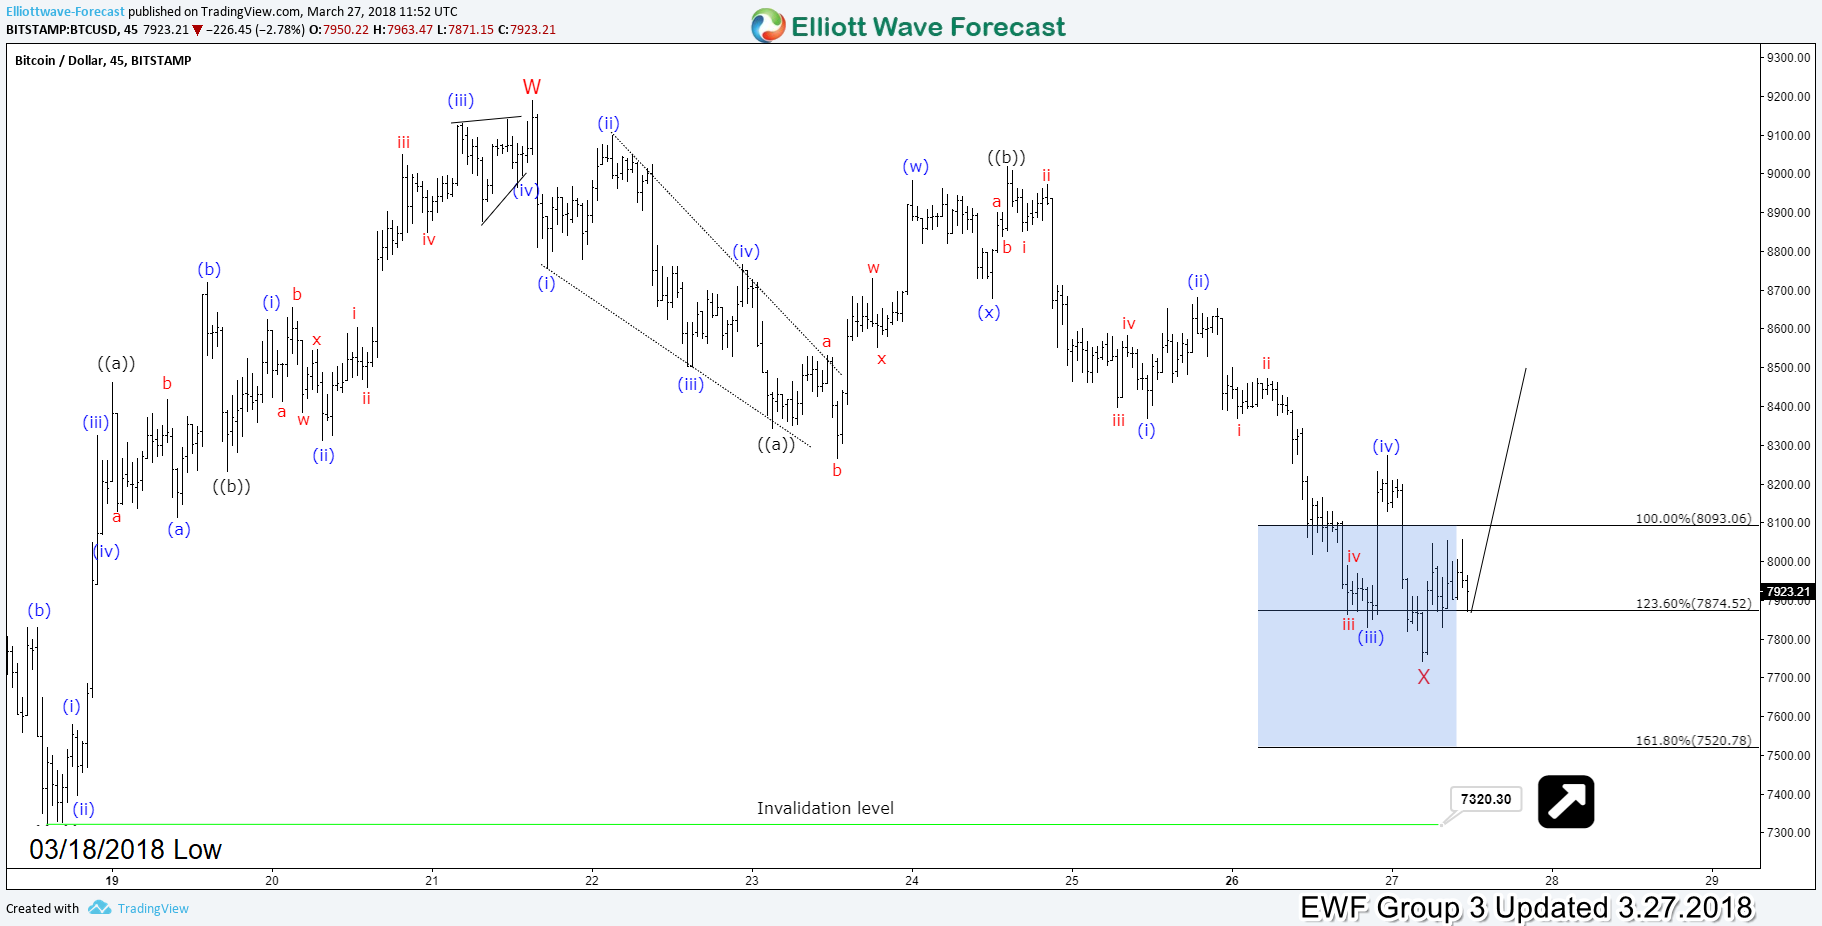 Bitcoin Elliott Wave Analysis Looking for Short Term Recovery